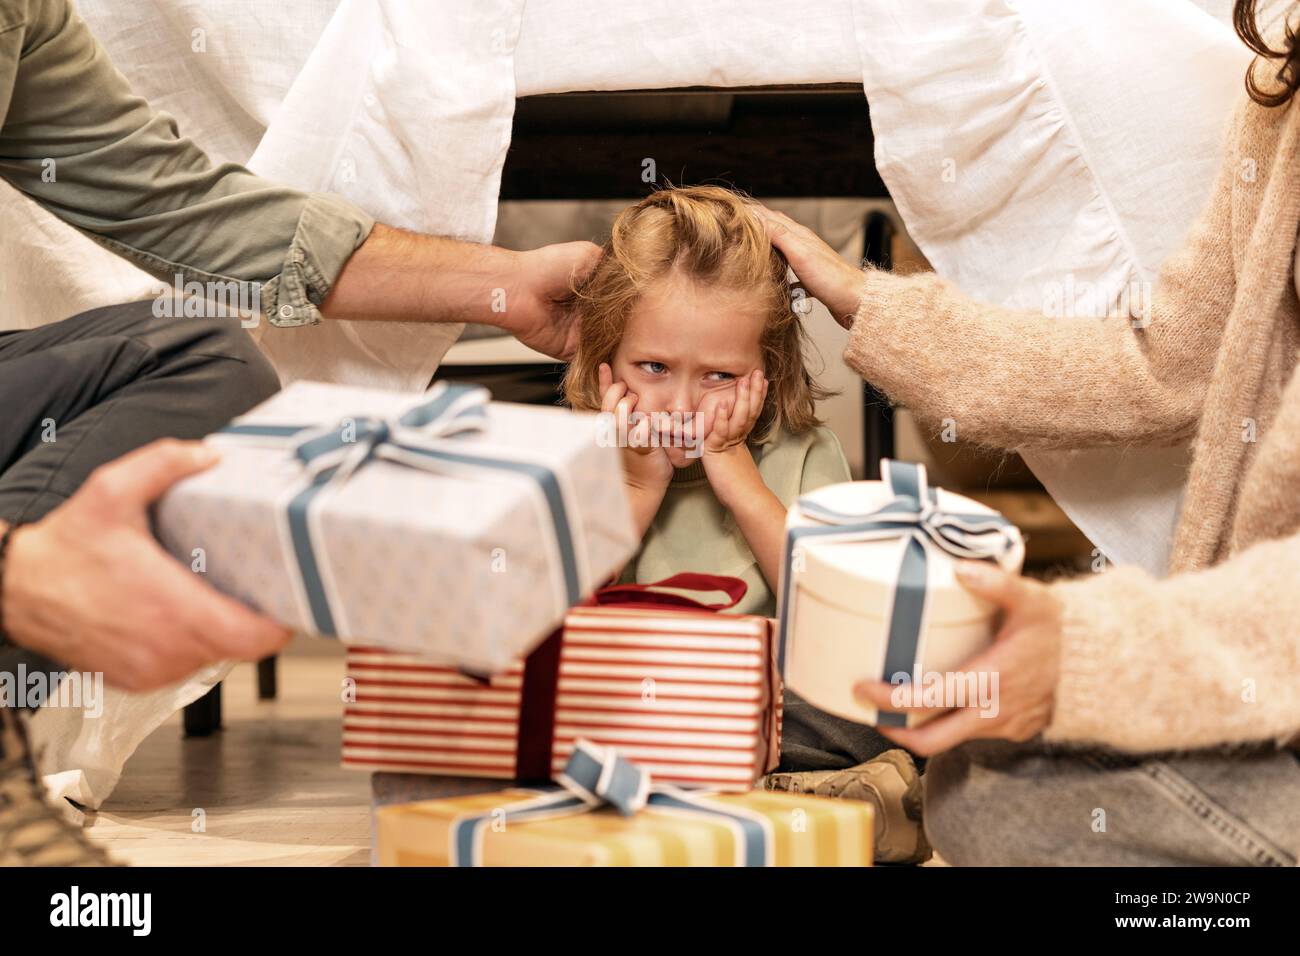 Two Parents sitting on the floor giving gifts to their unhappy son Stock Photo